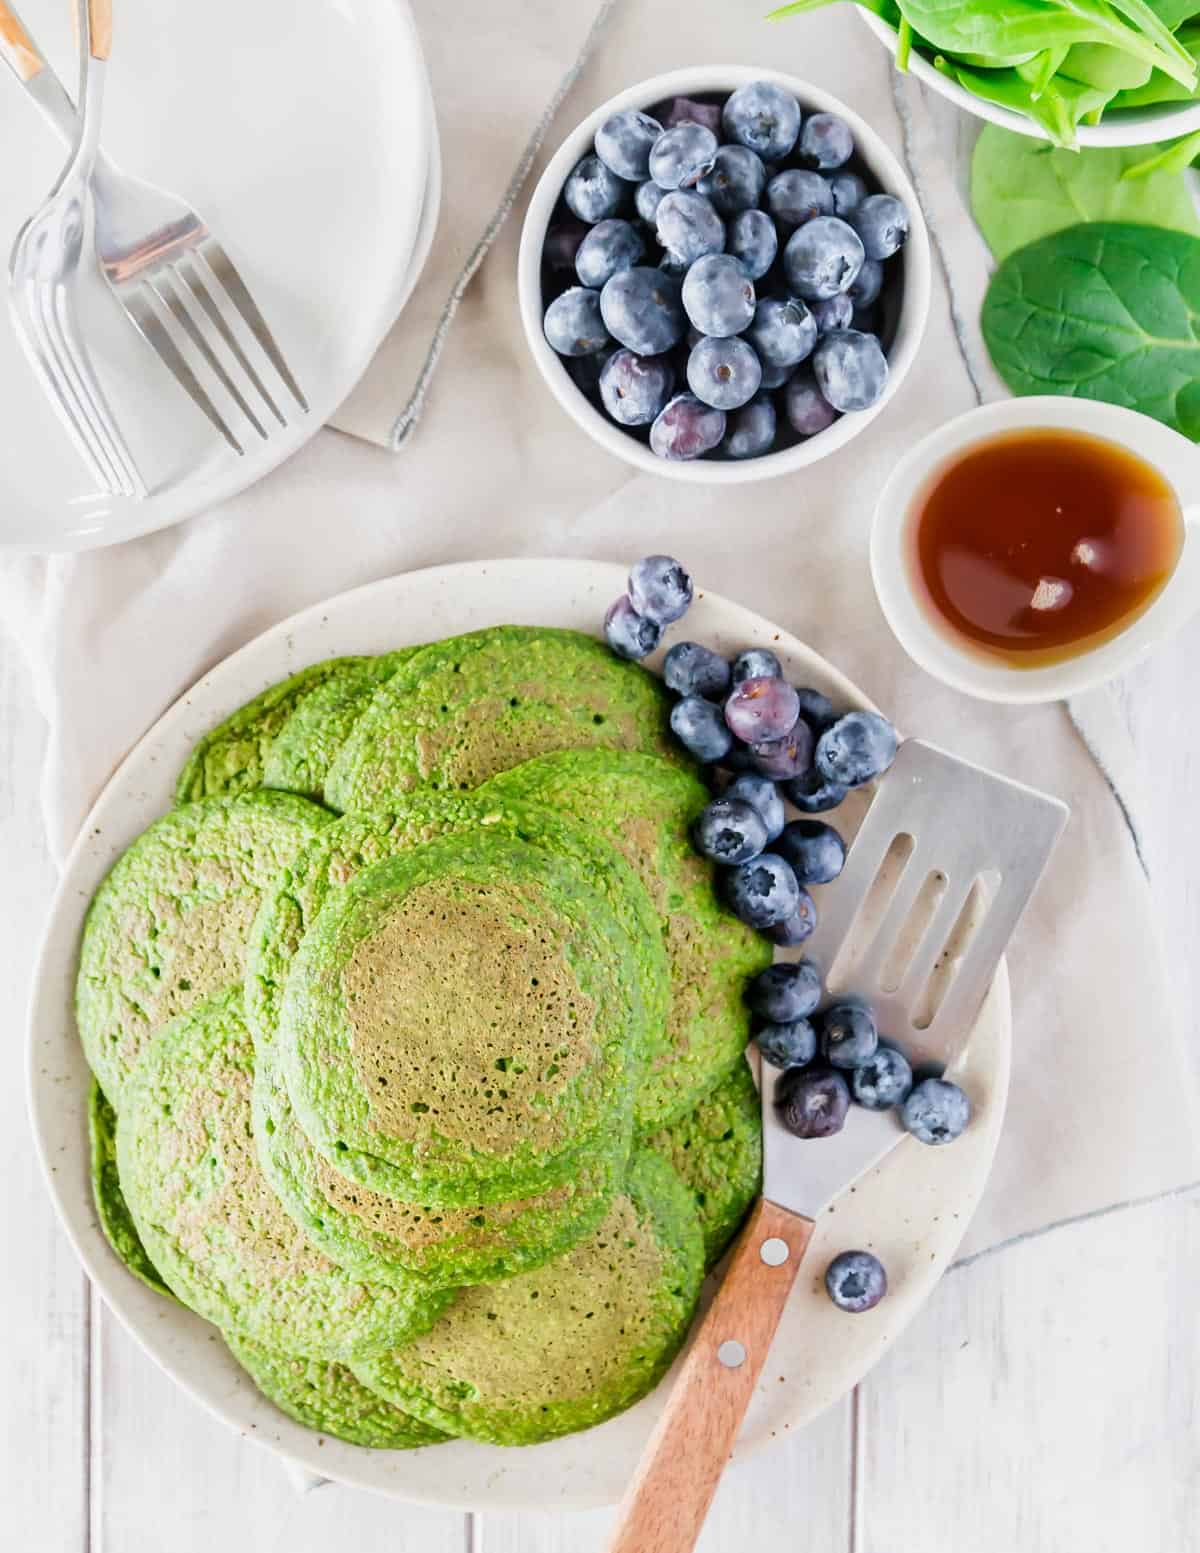 Gluten-free and vegan spinach pancakes are a fun festive breakfast for St. Patrick's Day.